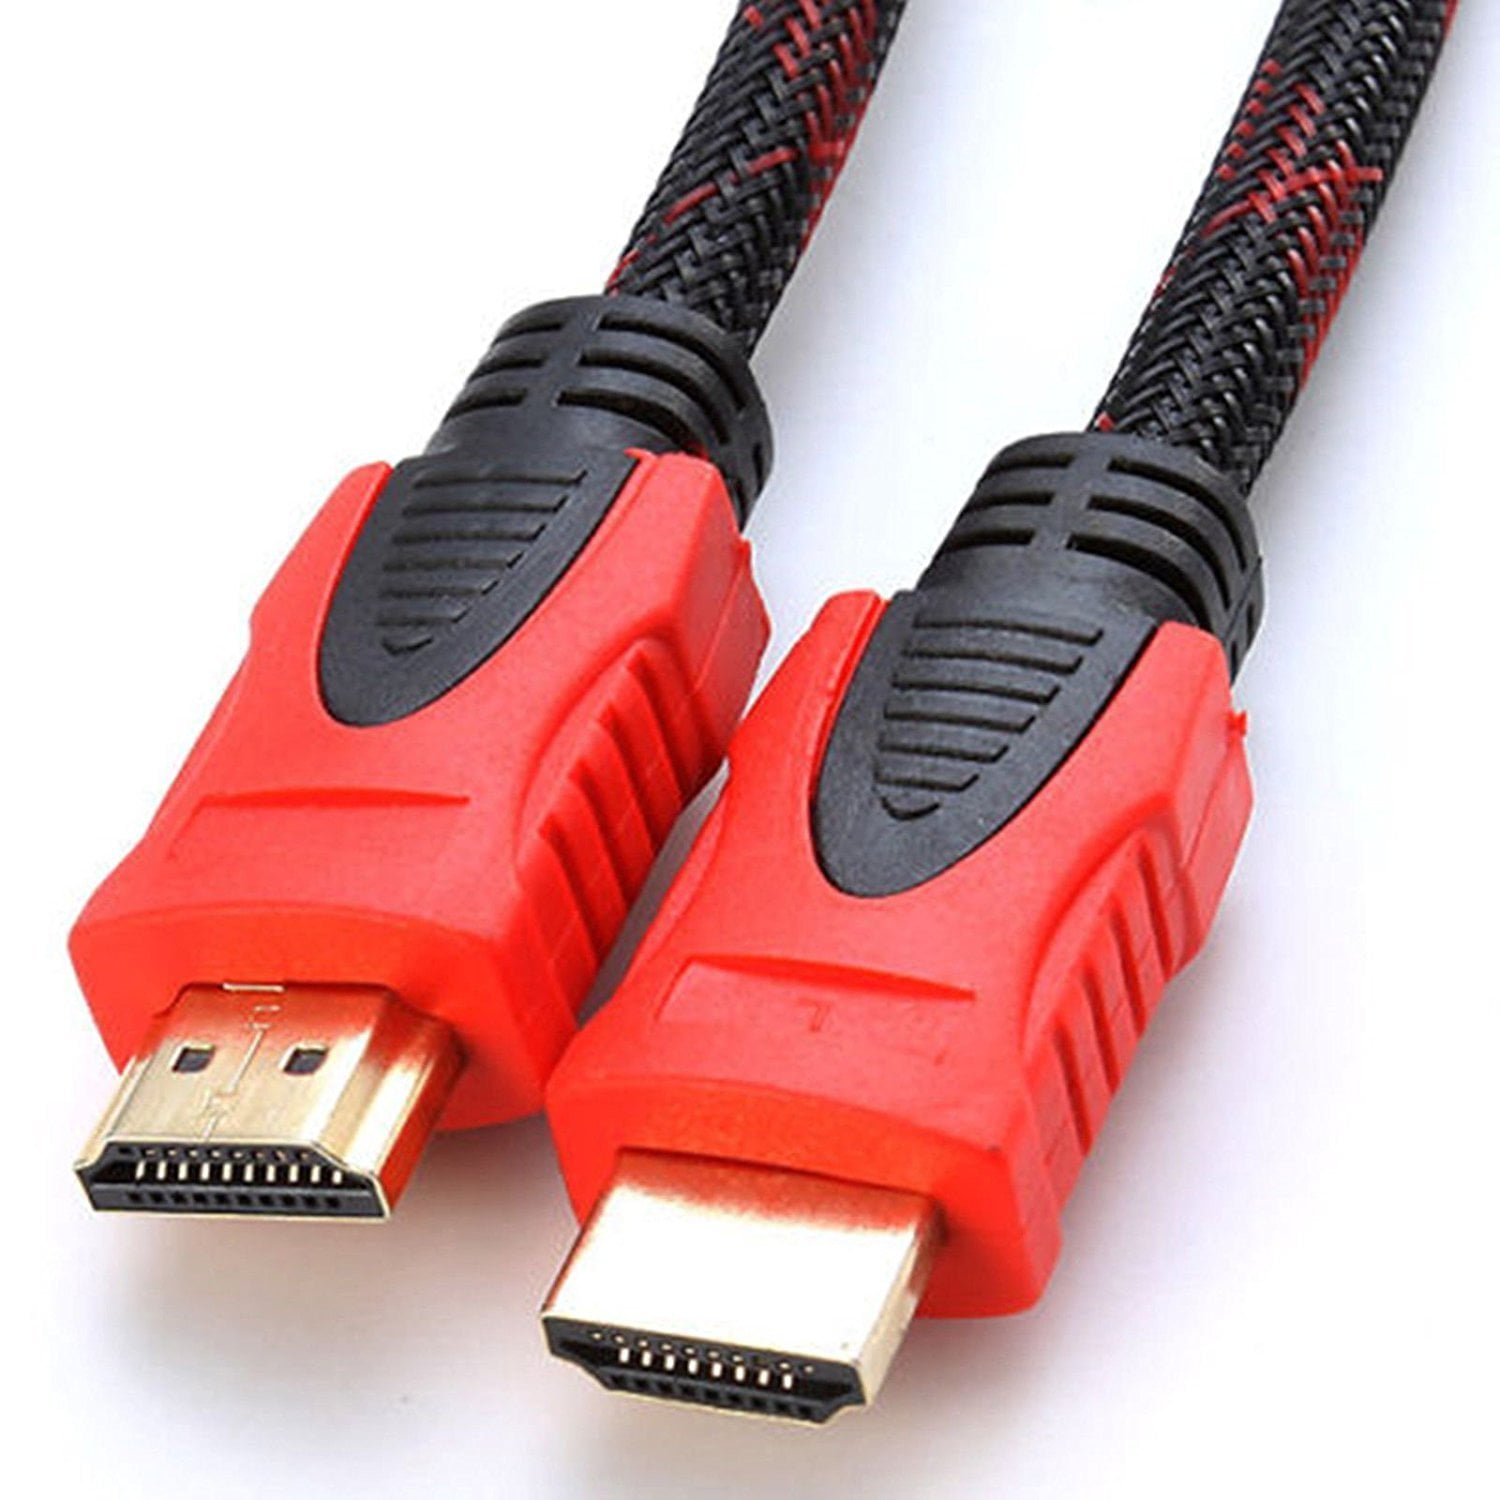 HD 1080P Braided HDMI Wire Cable Cord for Sony PlayStation 3 for Xbox 360 HD TV 